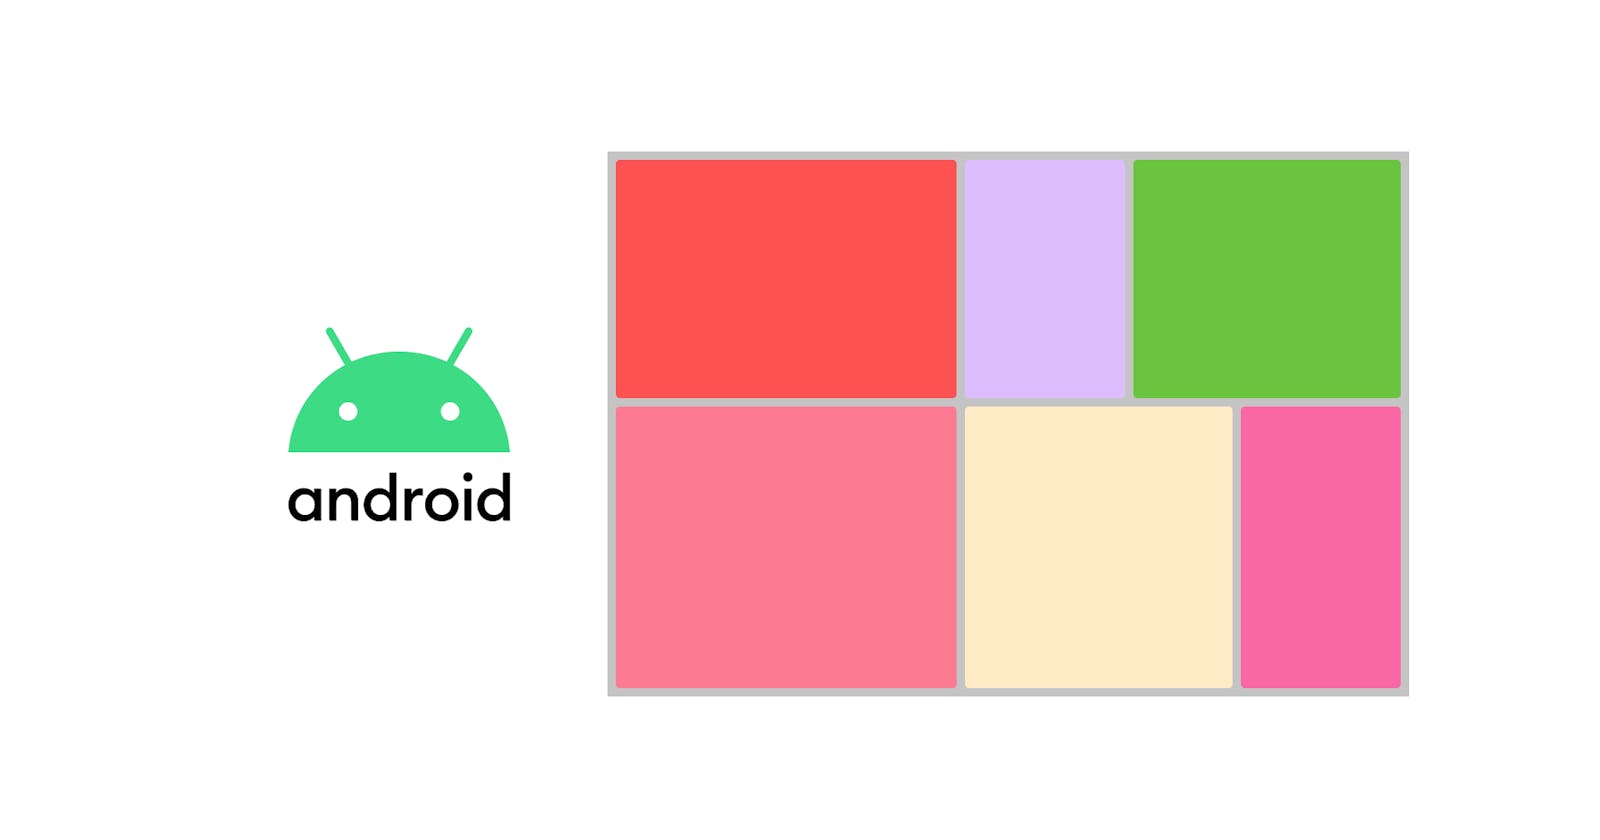 Creating uneven grids with FlexboxLayoutManager  on android